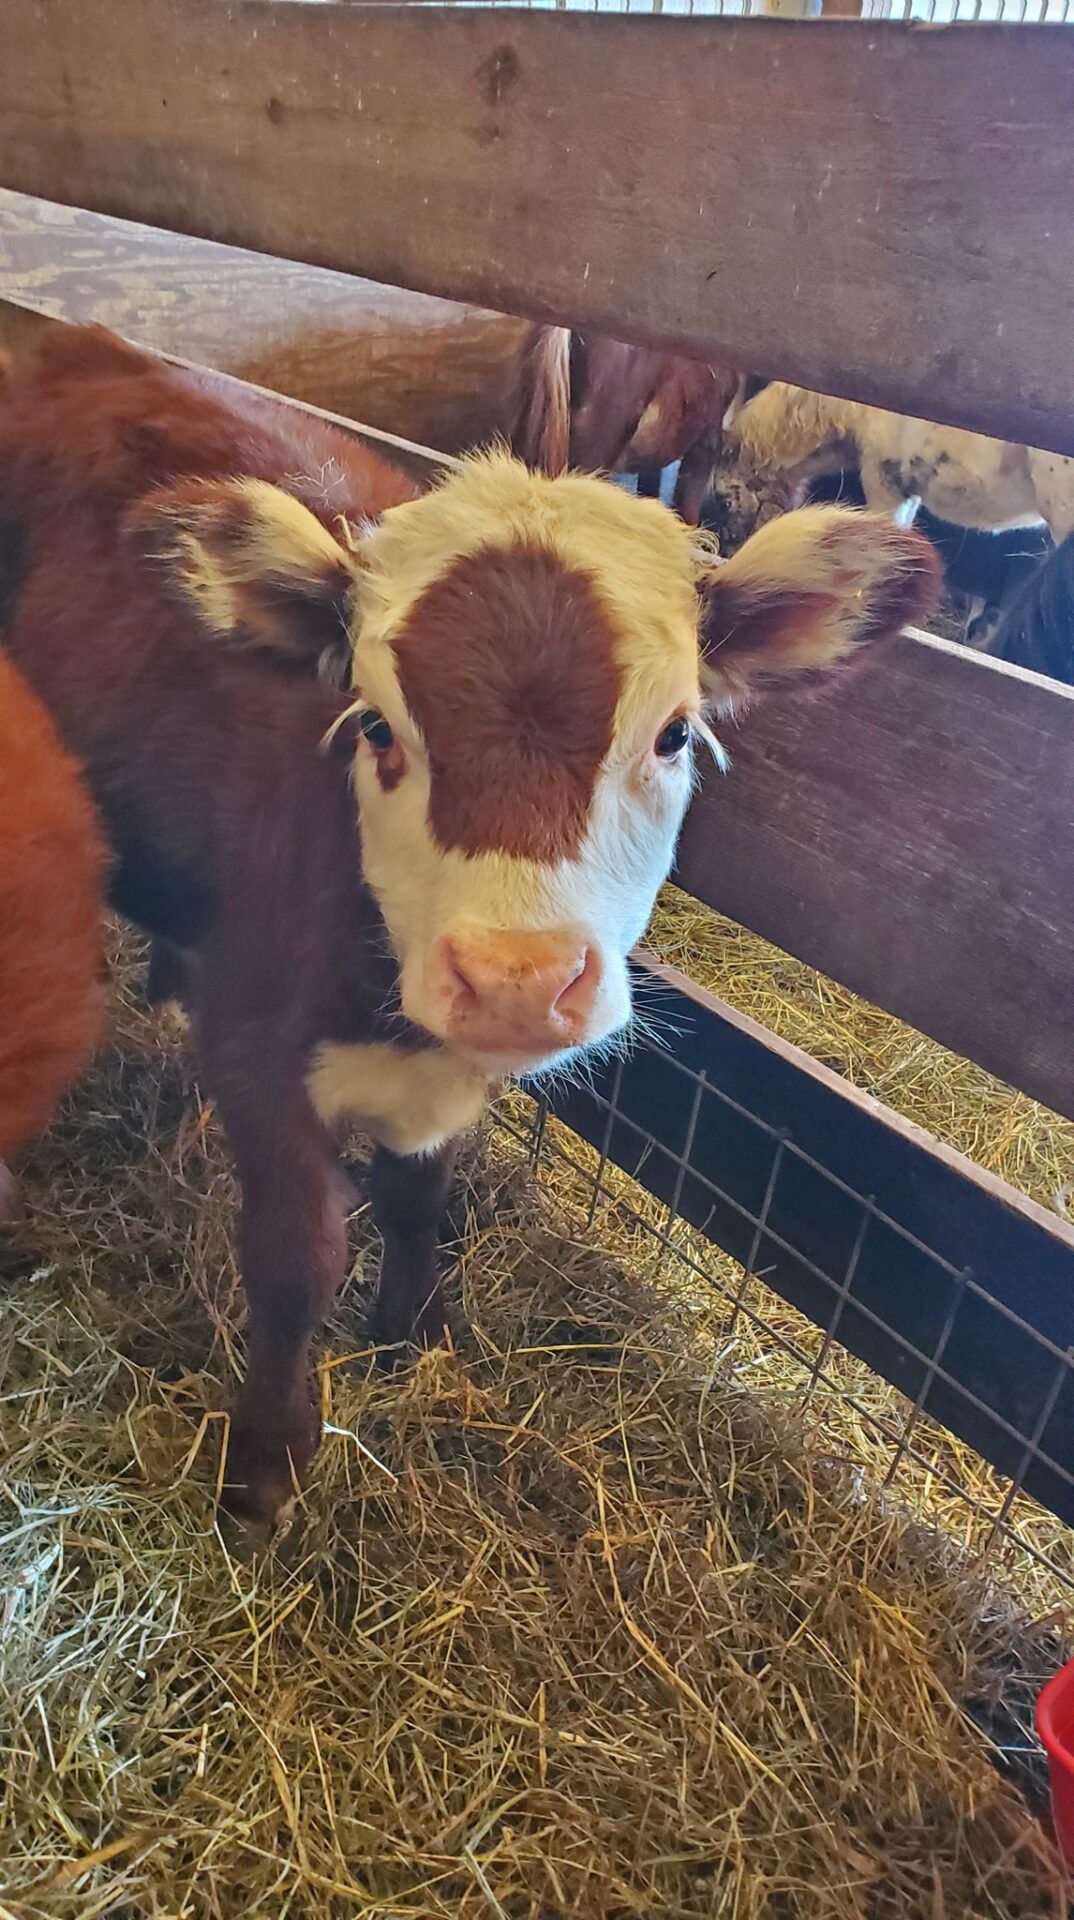 A Baby Calf Tied to a Farm With a Straw Farm